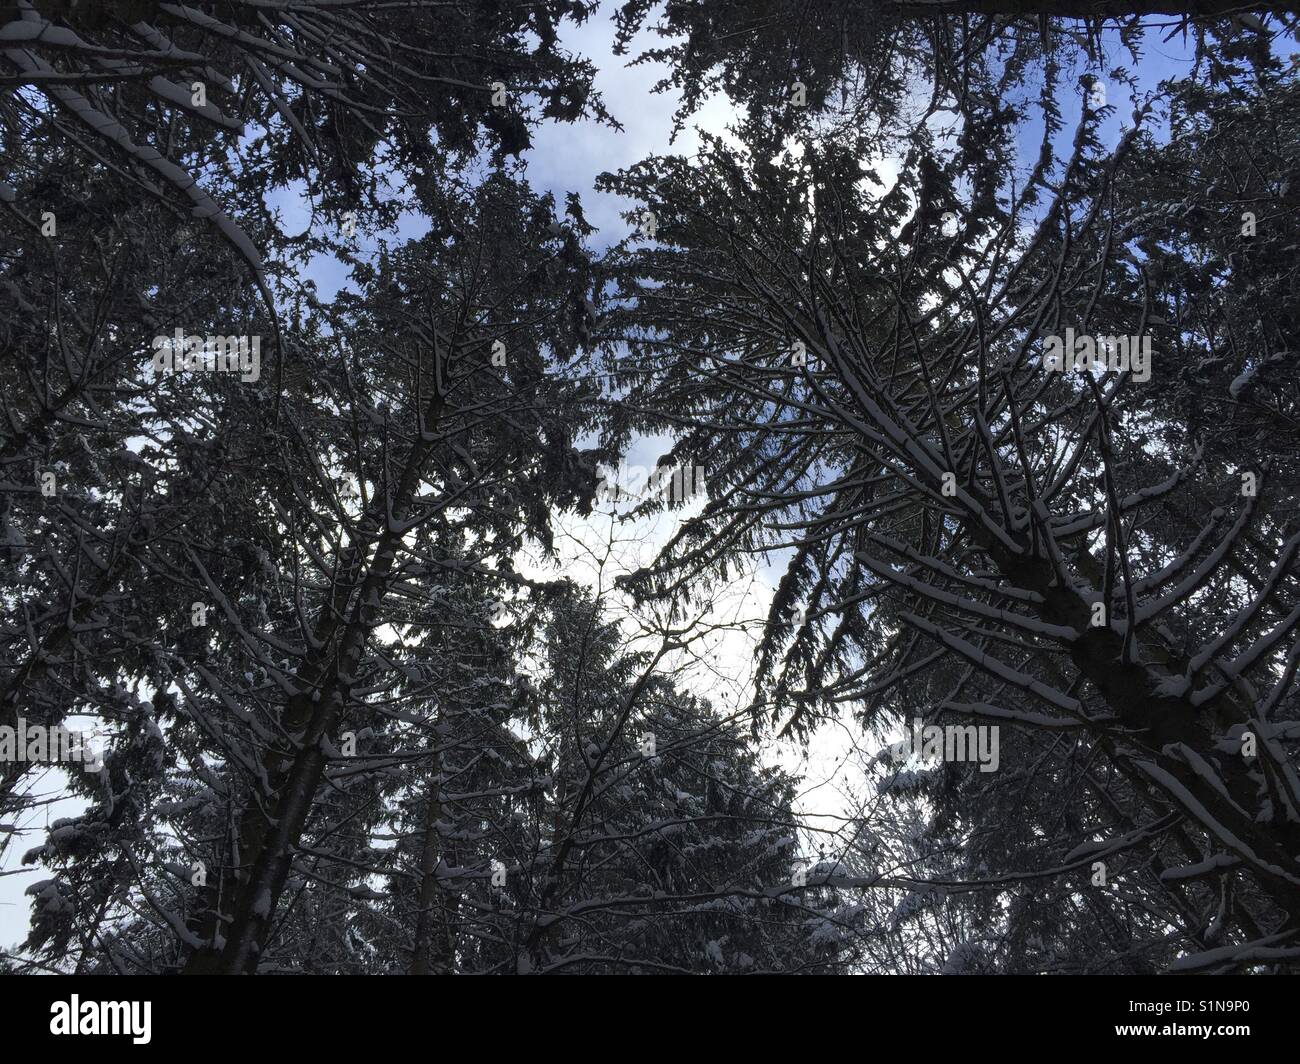 Big tall and high trees, pine or fir from below, looking up into blue sky in the forest of Bavaria, Germany Stock Photo